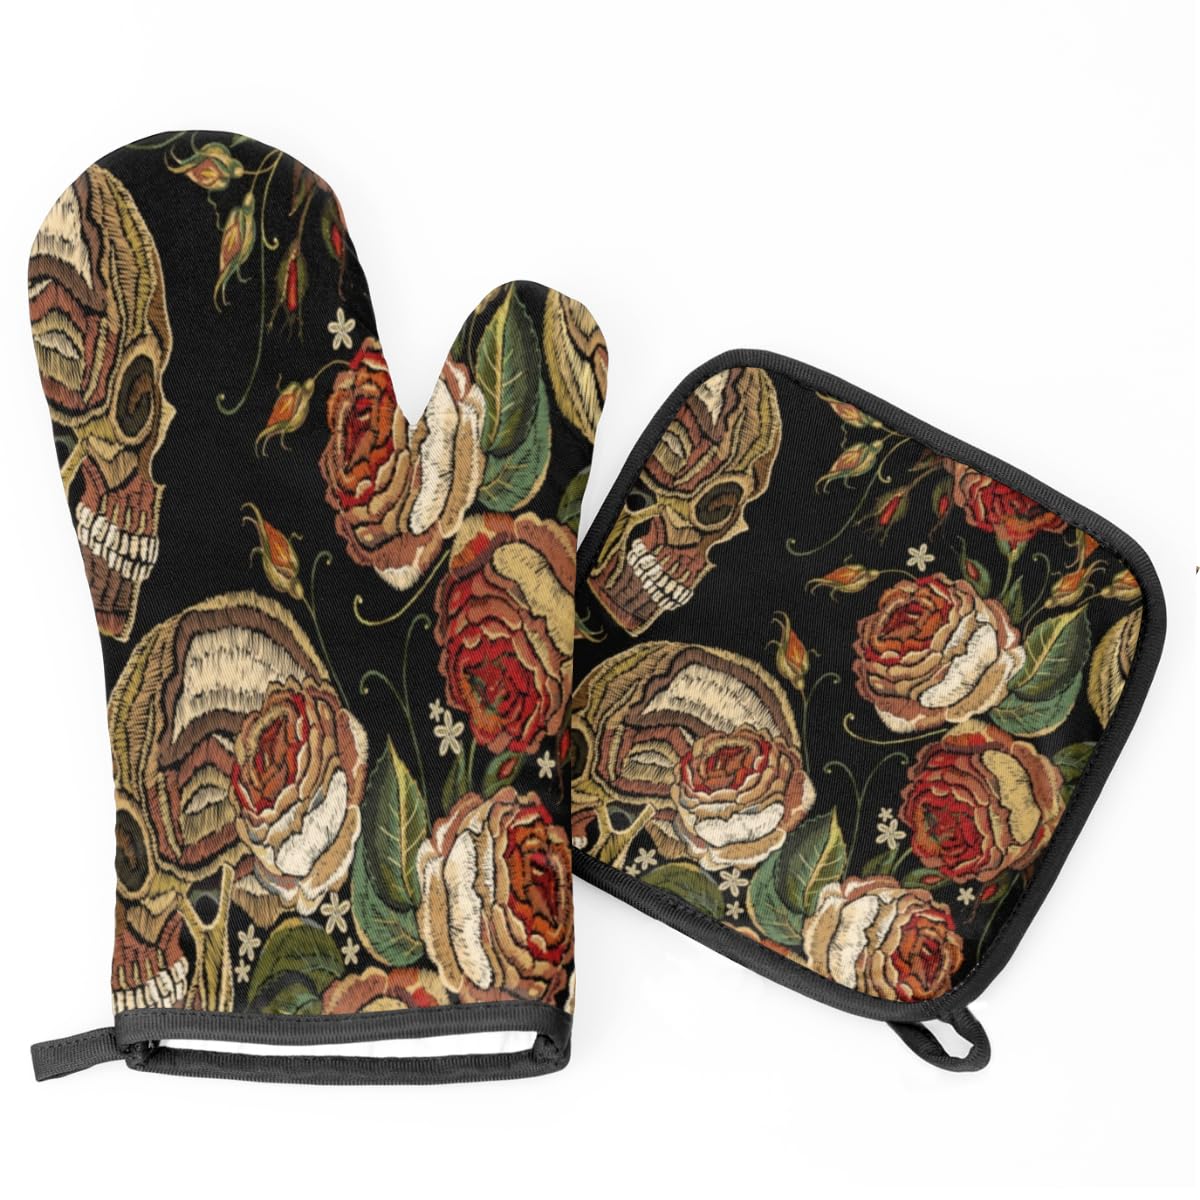 Embroidery Skull Roses Flowers Oven Mitts and Pot Holders Sets of 2 Heat Resistant Non-Slip Kitchen Gloves Hot Pads with Inner Cotton Layer for Cooking BBQ Baking Grilling